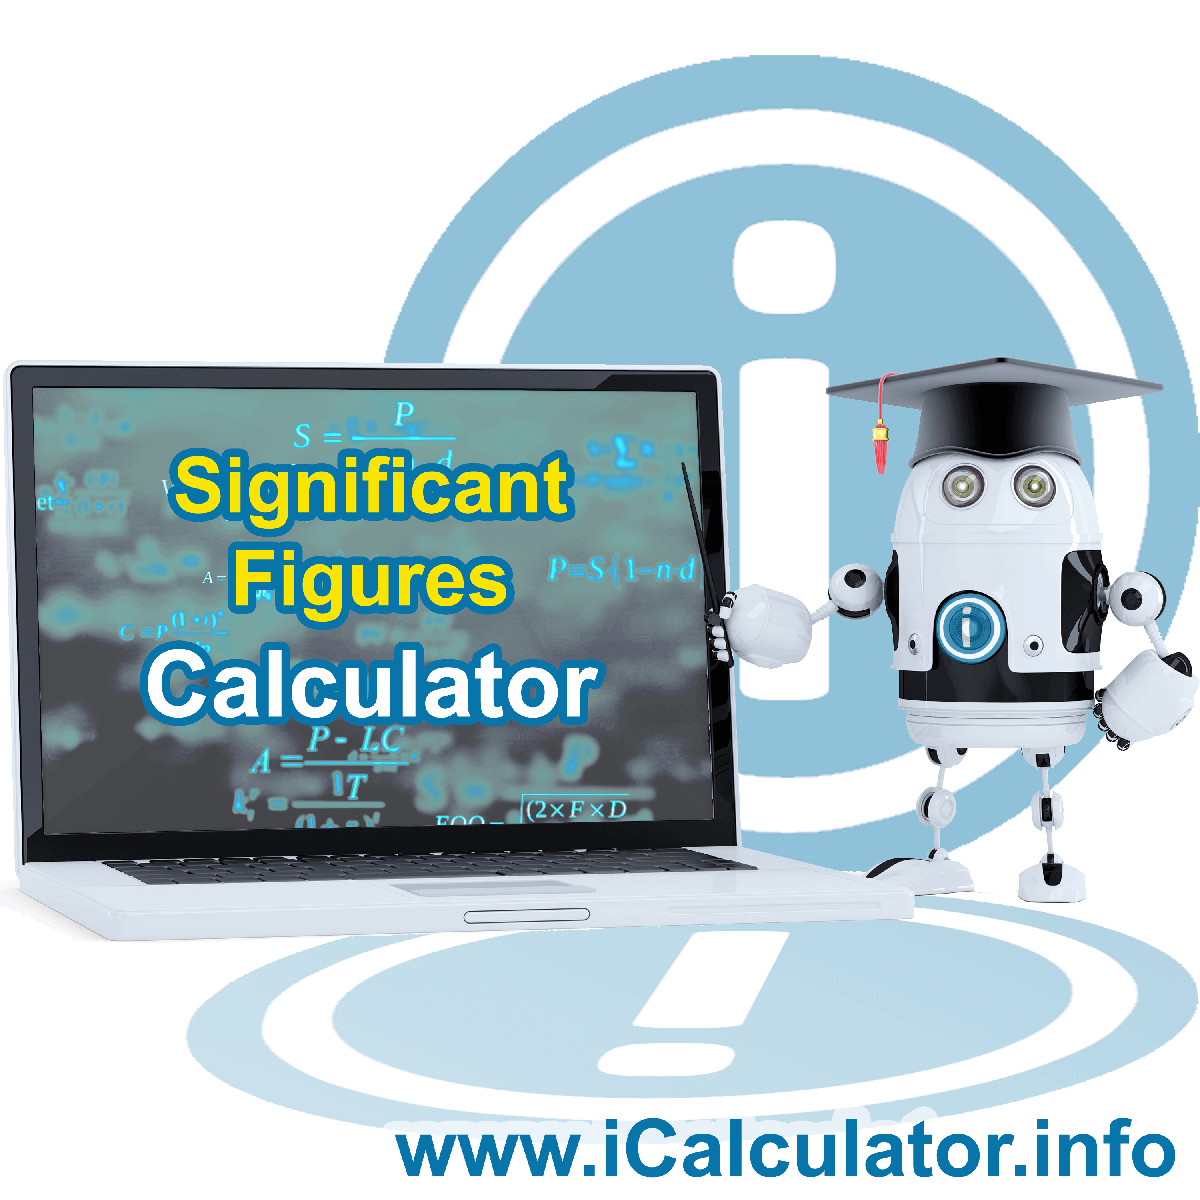 The Physics Sig Fig Calculator by iCalculator, also known as a Significant Figure Calculator, is a good calculator for calculating a range of significant figures for physics functions. This is a good calculator with supporting significant figures formula and guide to significant figures.